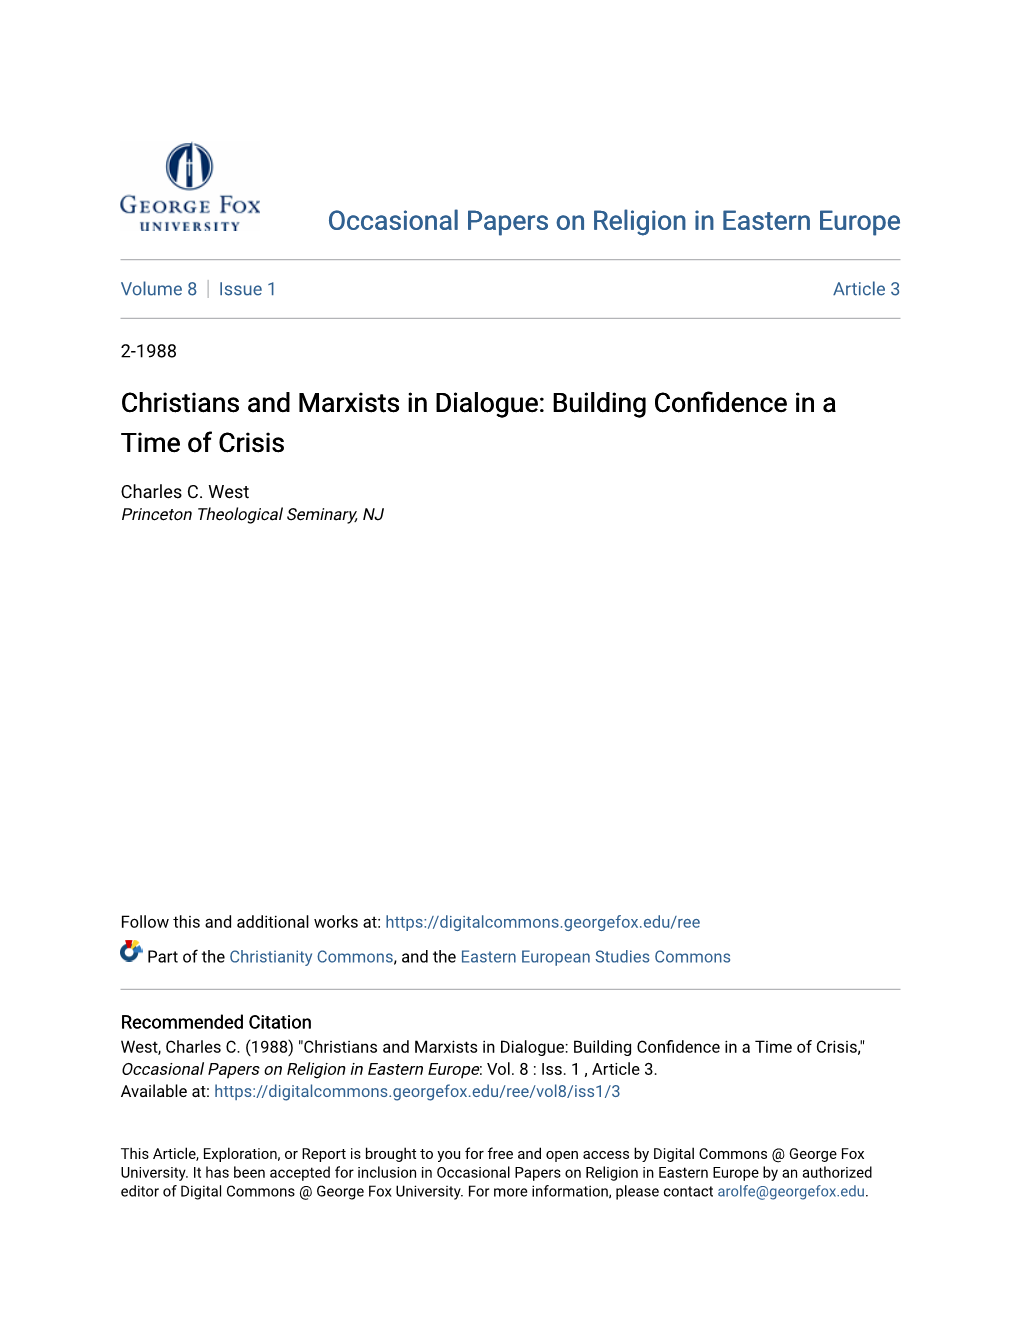 Christians and Marxists in Dialogue: Building Confidence in a Time of Crisis